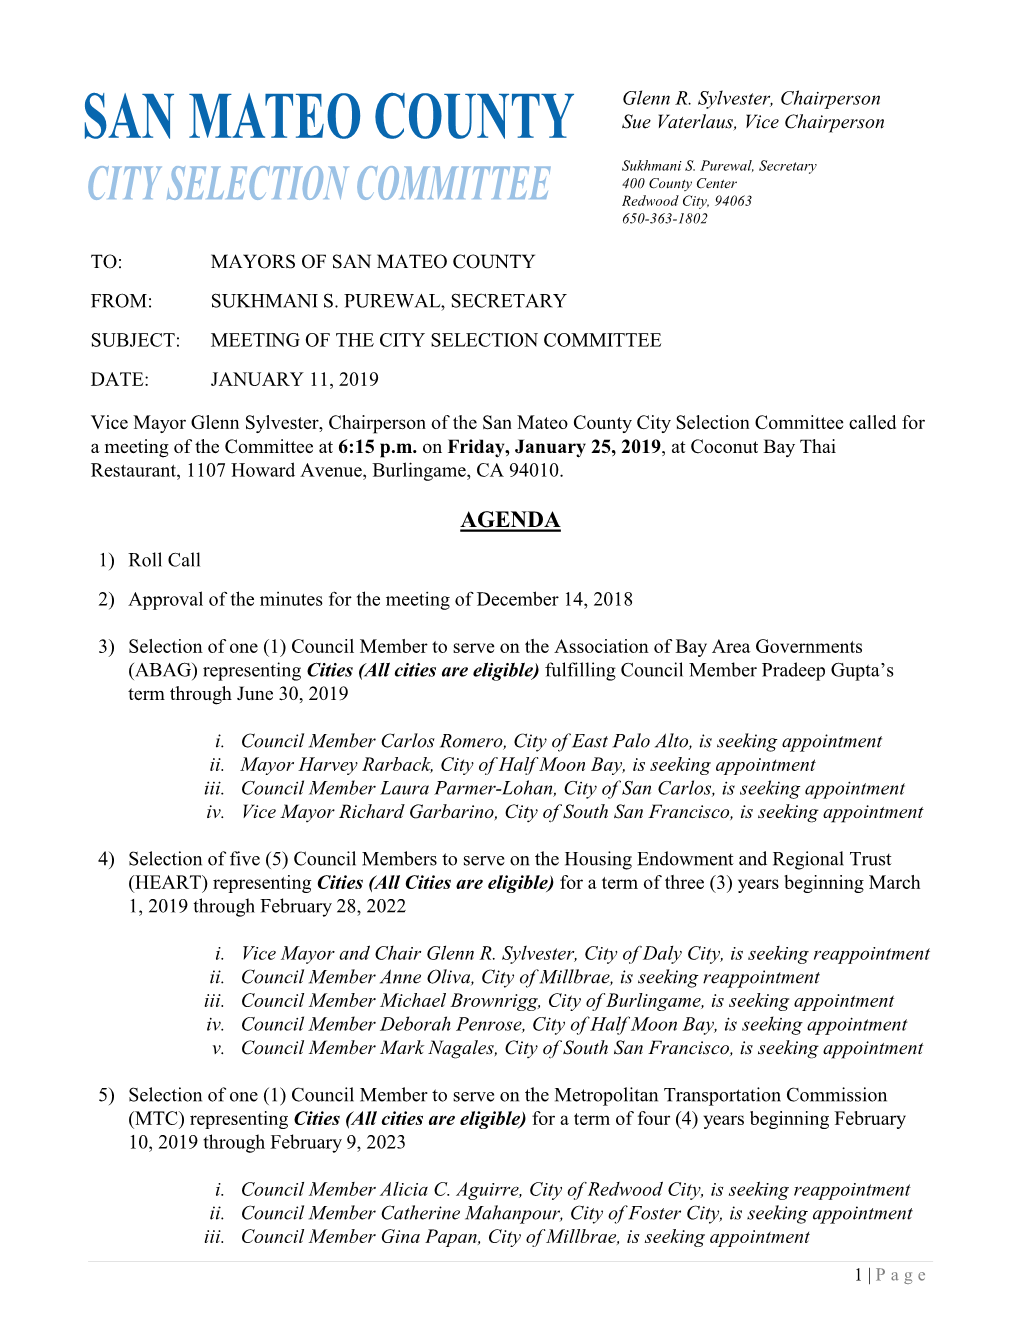 San Mateo County City Selection Committee Called for a Meeting of the Committee at 6:15 P.M